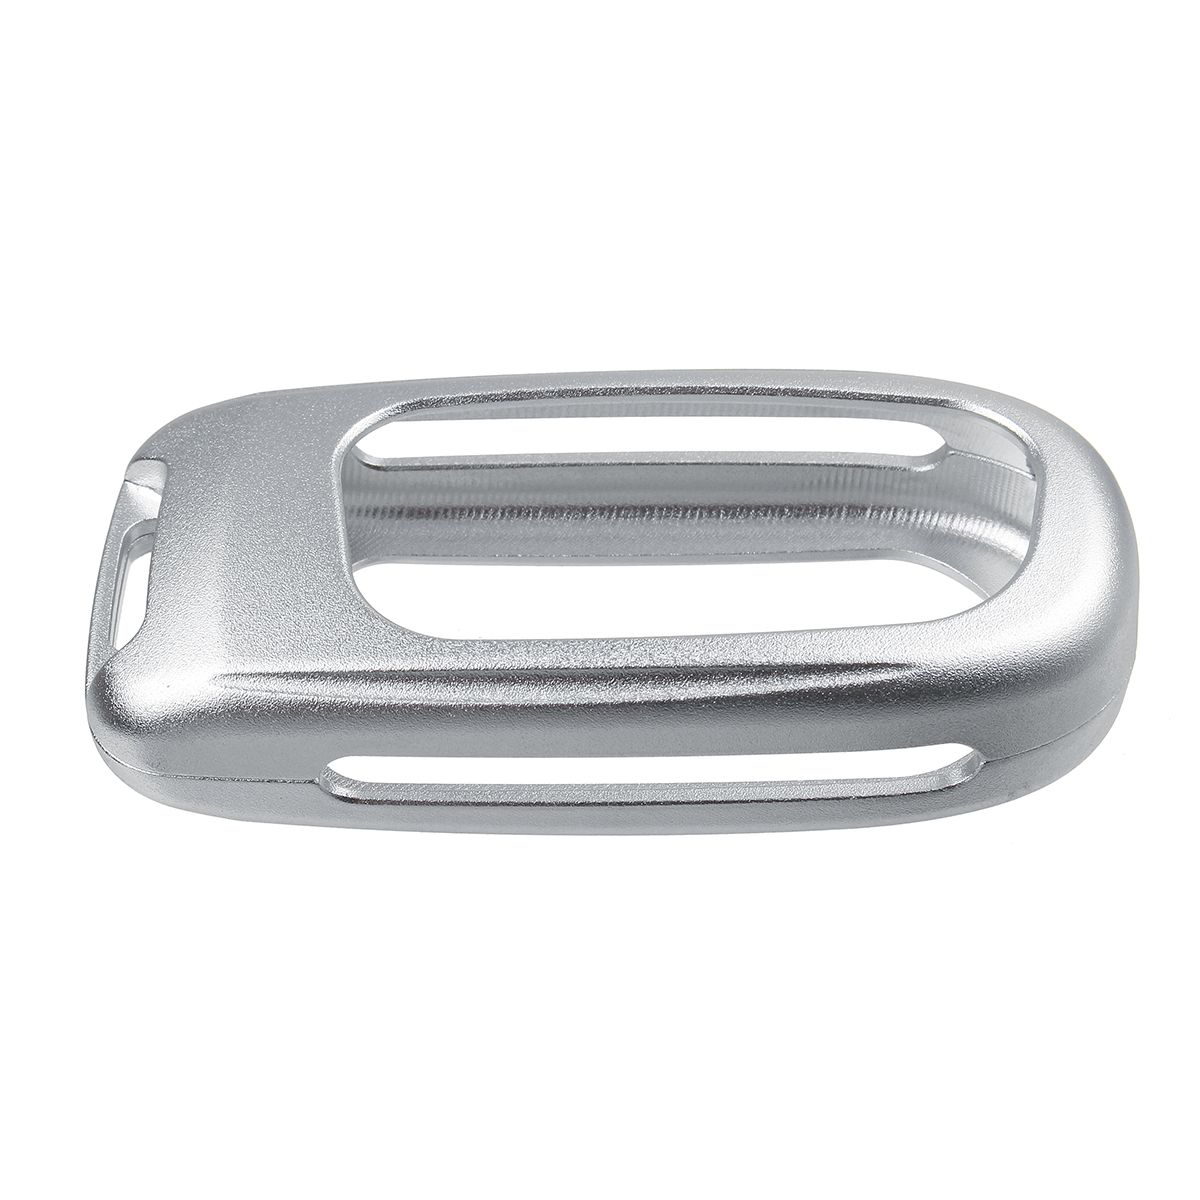 Aluminum-Alloy-Remote-Key-Cover-Fob-Case-Shell-For-Dodge-Jeep-Grand-Chrysler-1443088